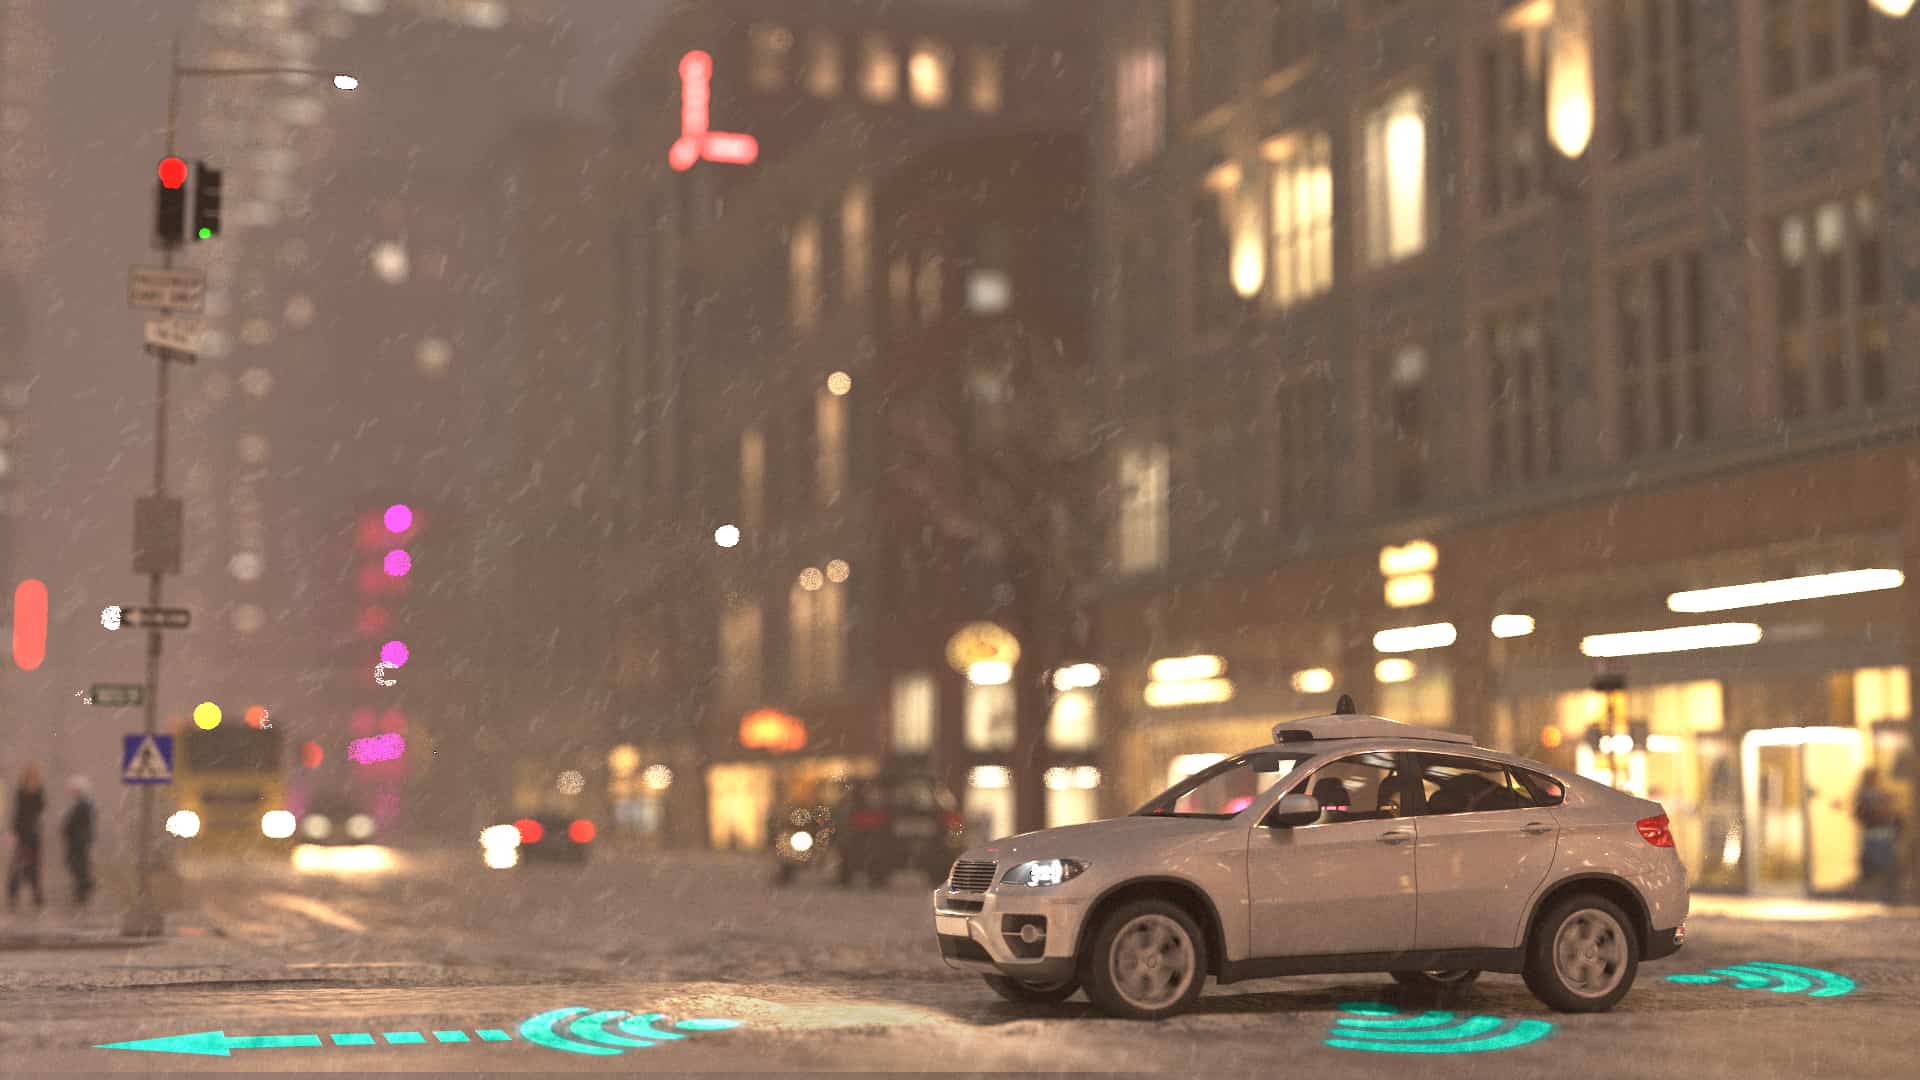 Oxford researchers develop new AI to enable autonomous vehicles to adapt to challenging weather conditions